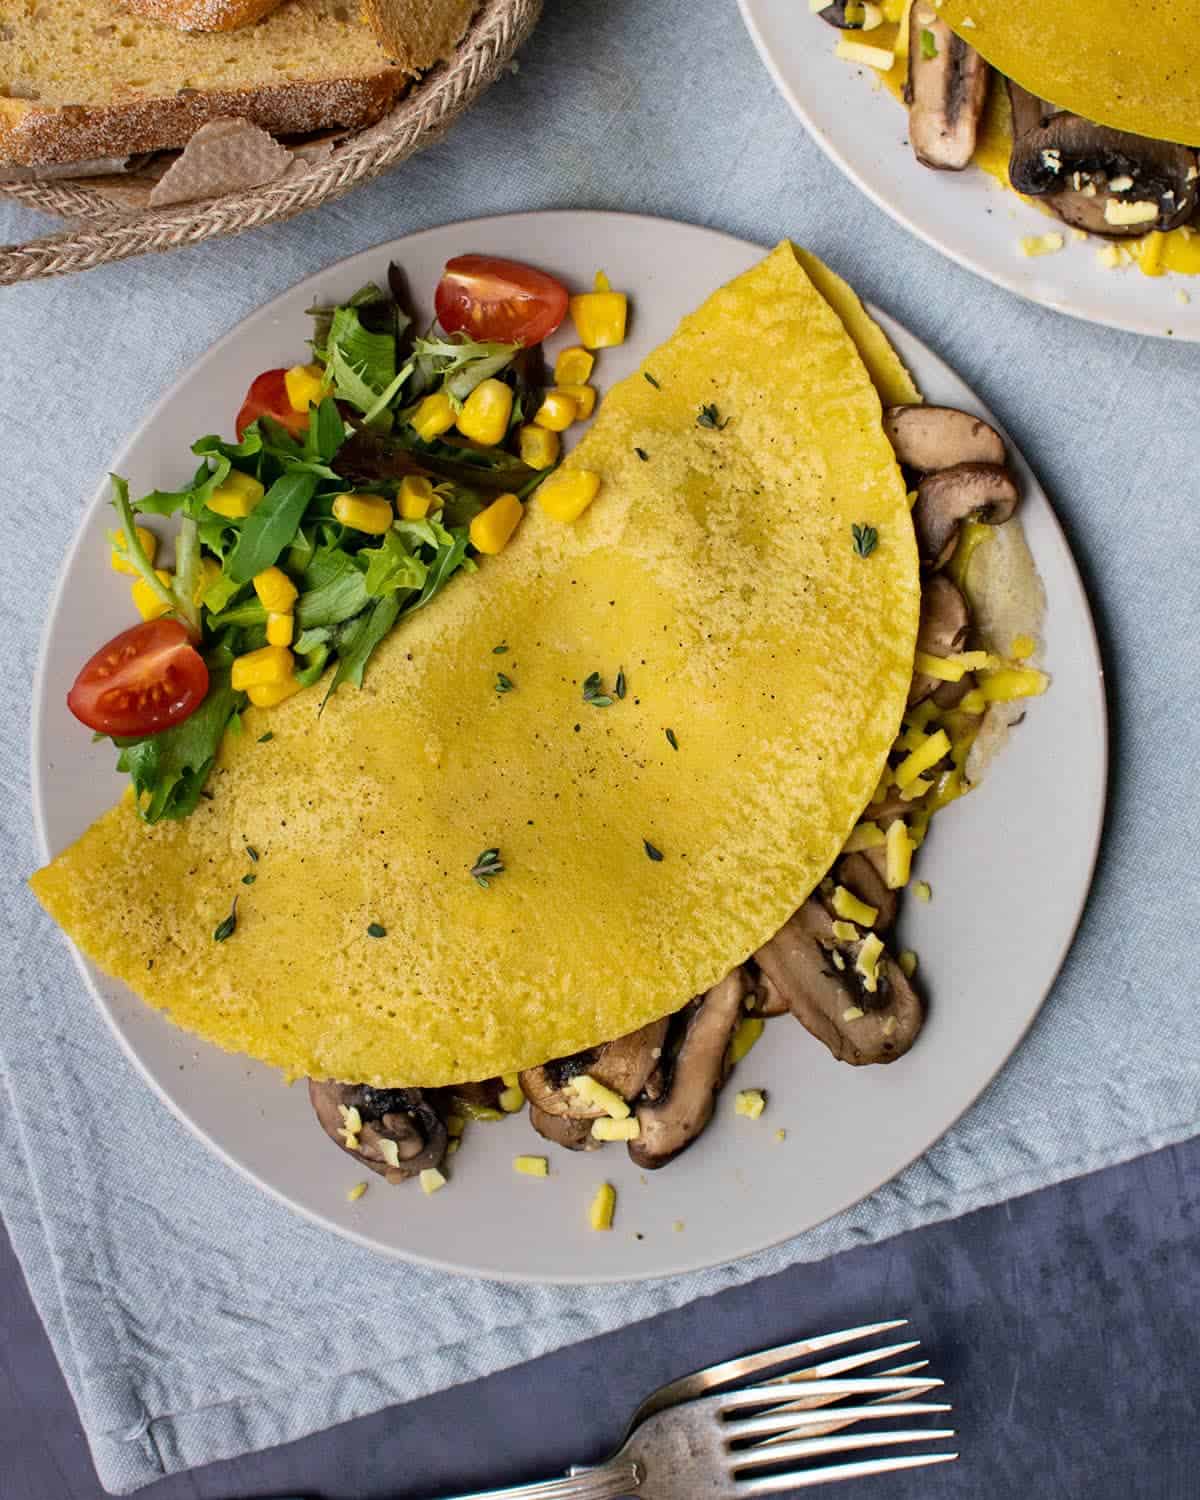 A chickpea flour omelette on a plate filled with mushrooms and served with a side salad.